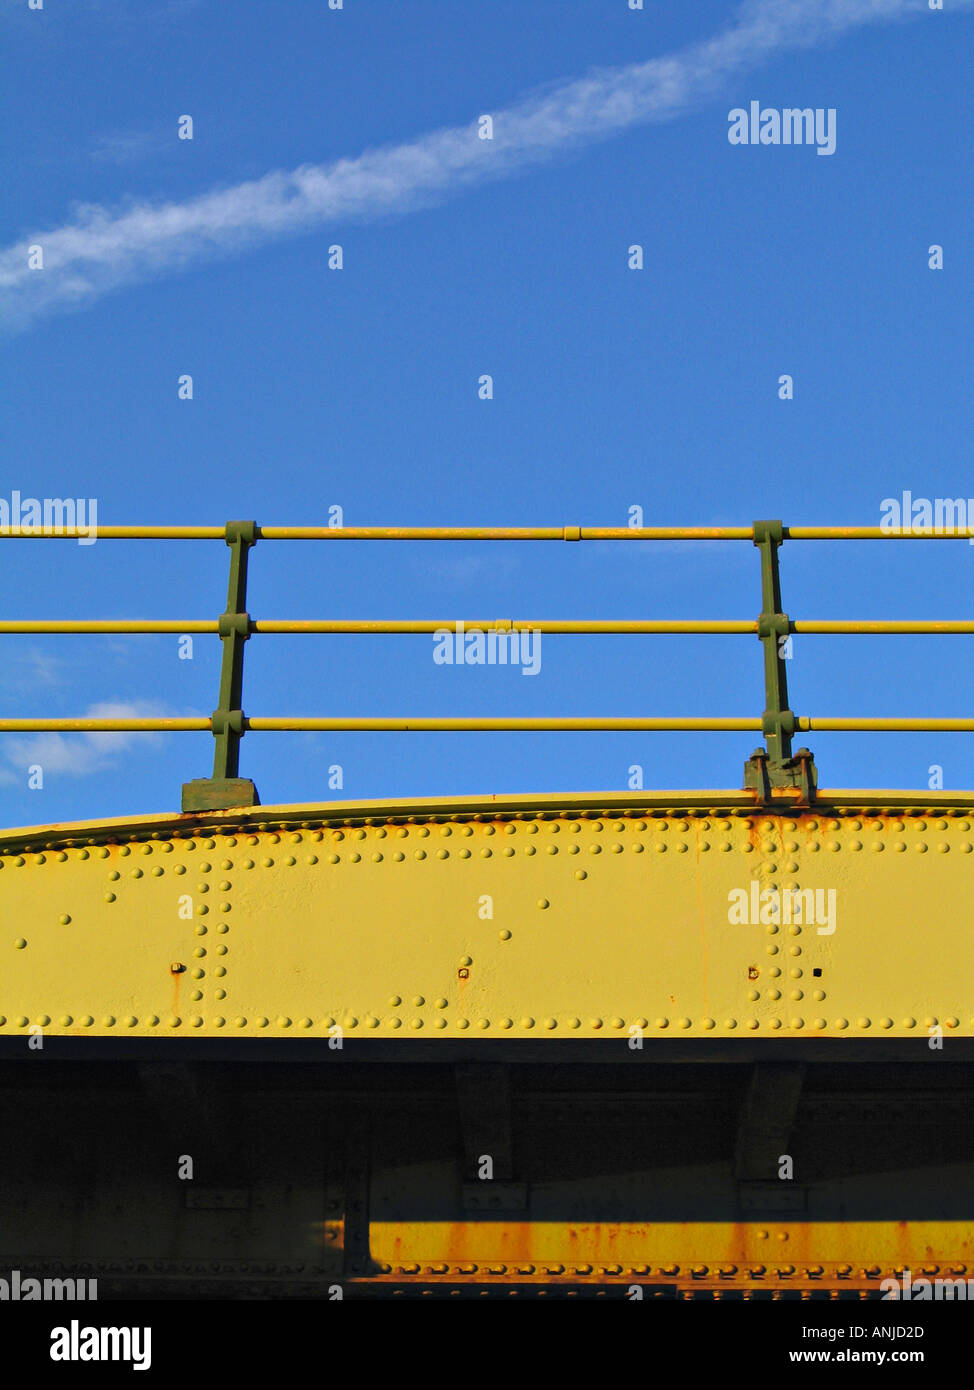 Old, riveted railway bridge lit by evening sun with a blue sky behind. Stock Photo